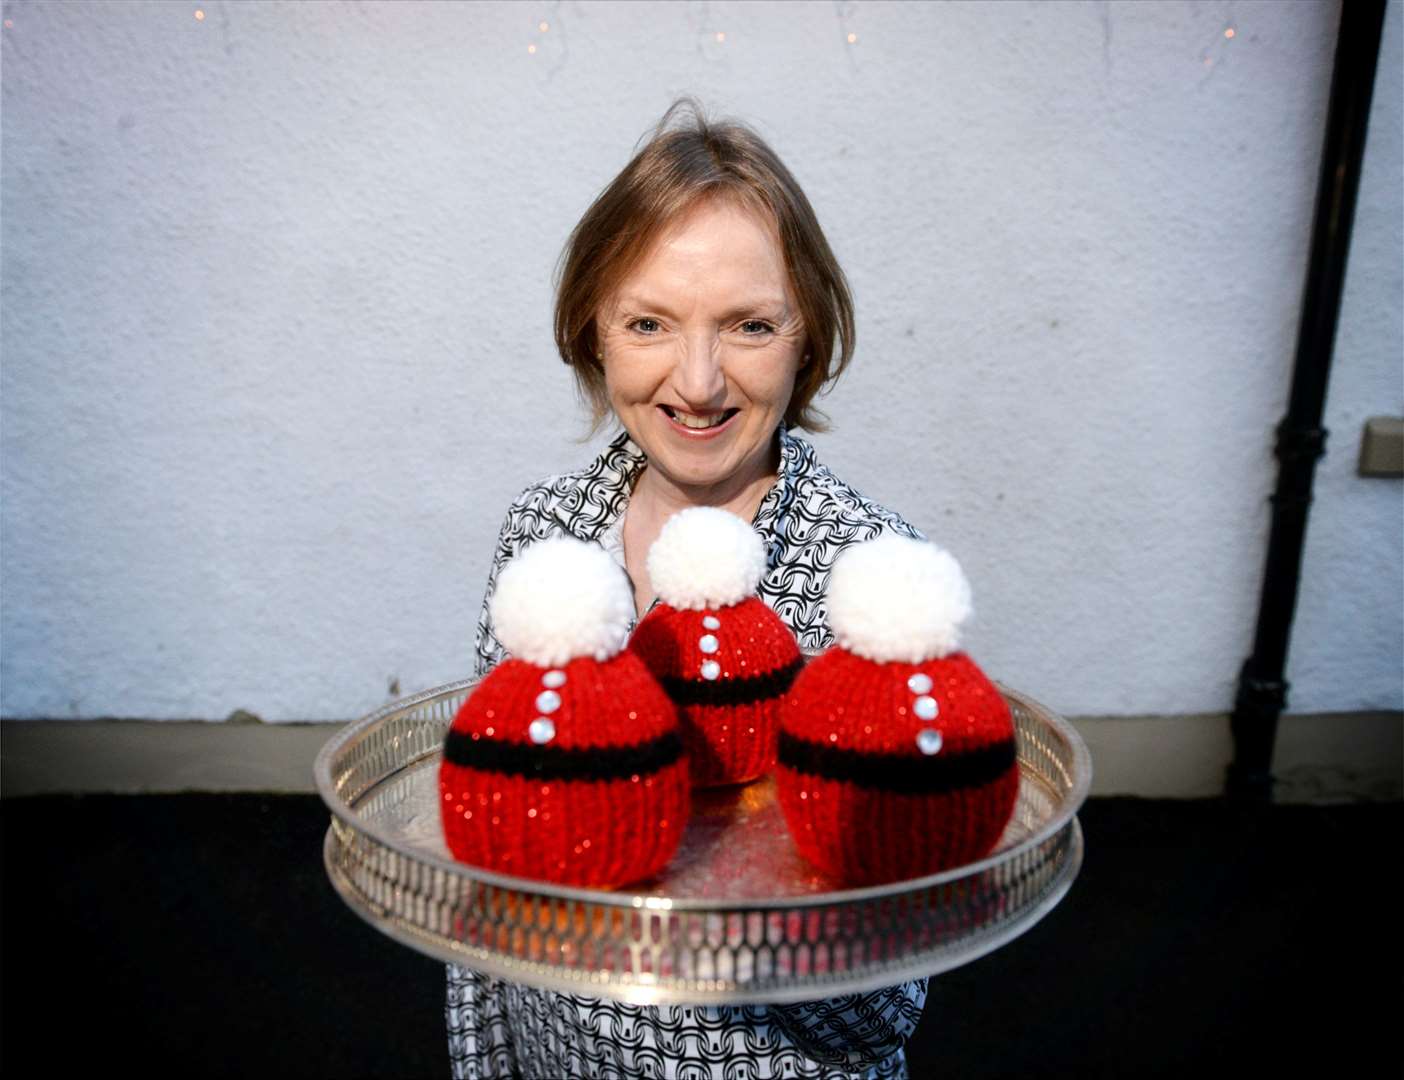 Jacqueline MacDonald from Dingwall knitted hats for chocolate oranges to benefit a local cause. The response was remarkably success. Picture: James Mackenzie